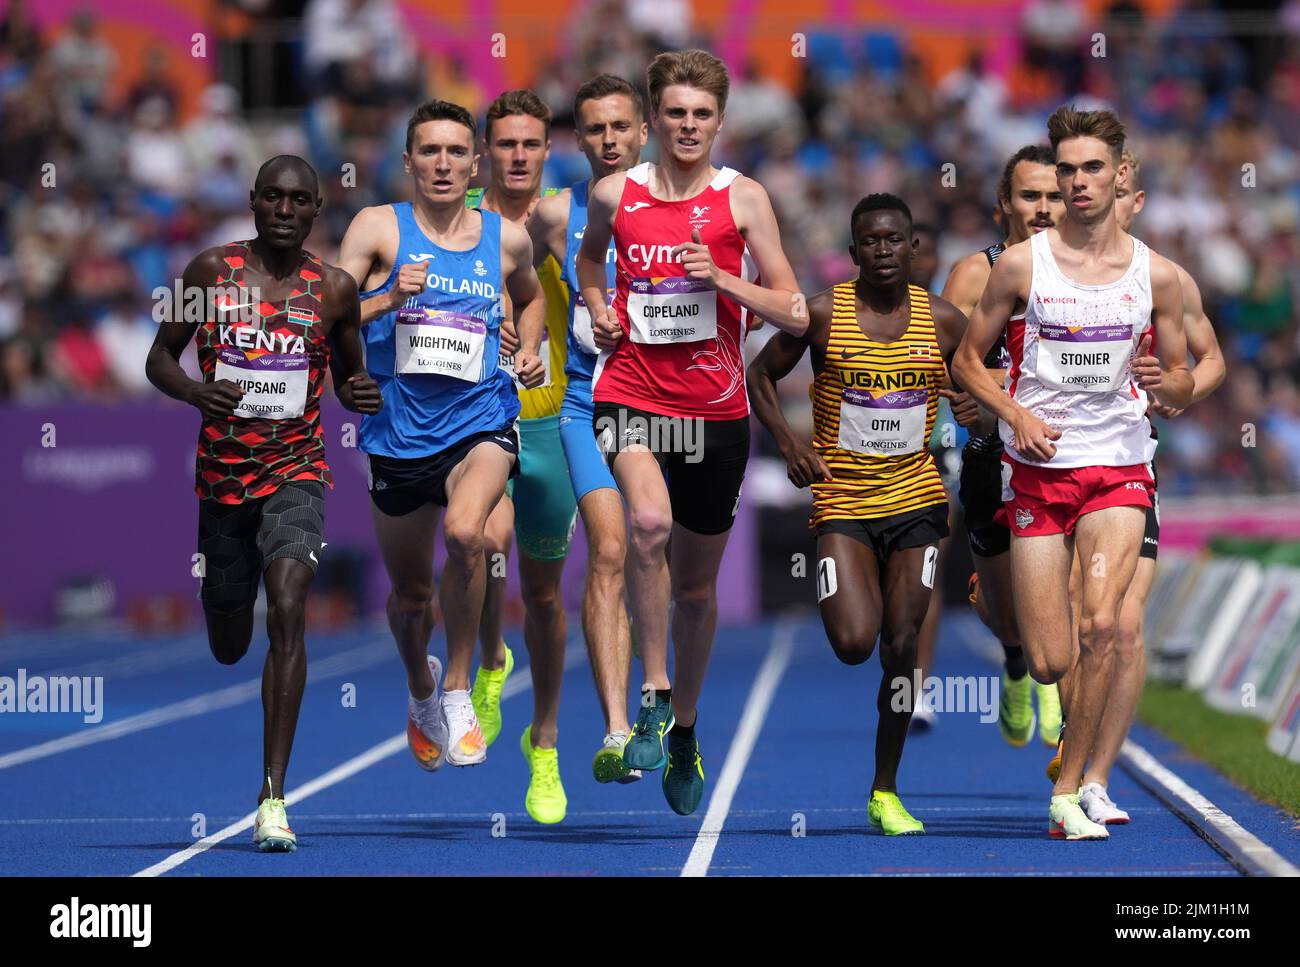 Scotland's Jake Wightman (second left) in action during the second heat the Men's 1500 metres round one at Alexander Stadium on day seven of the 2022 Commonwealth Games in Birmingham. Picture date: Thursday August 4, 2022. Stock Photo